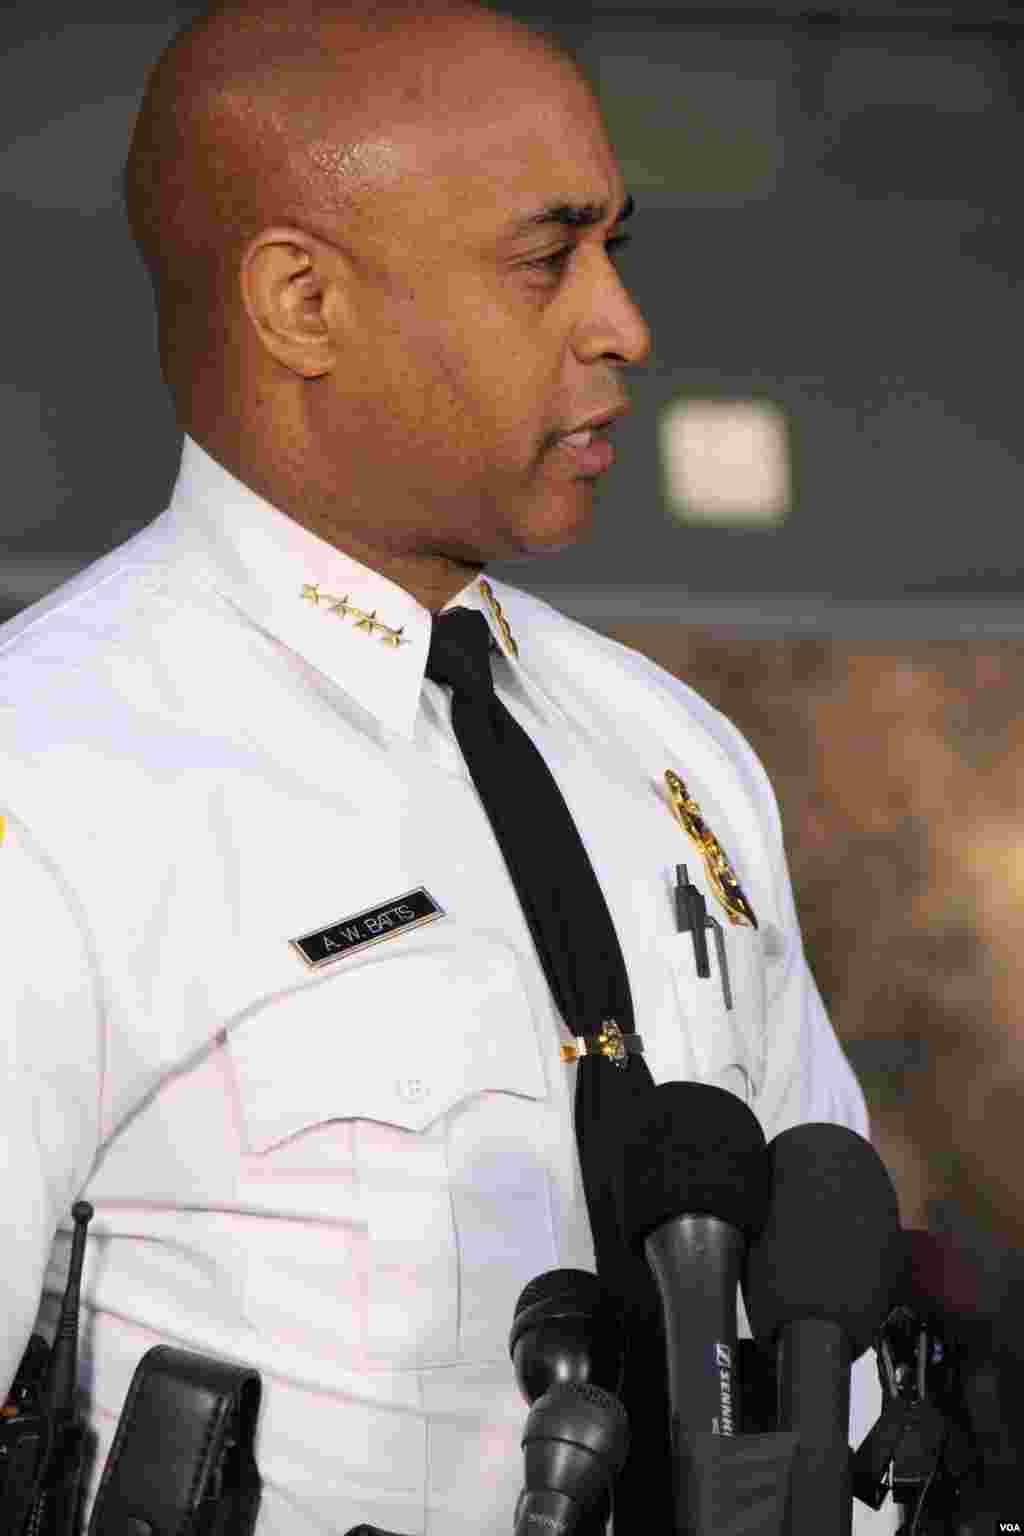 Baltimore Police Commissioner Anthony Batts announces the arrests of 16 adults and 2 juveniles in one day, bringing the total arrests linked to protests this week to nearly 275. (Victoria Macchi/VOA News)